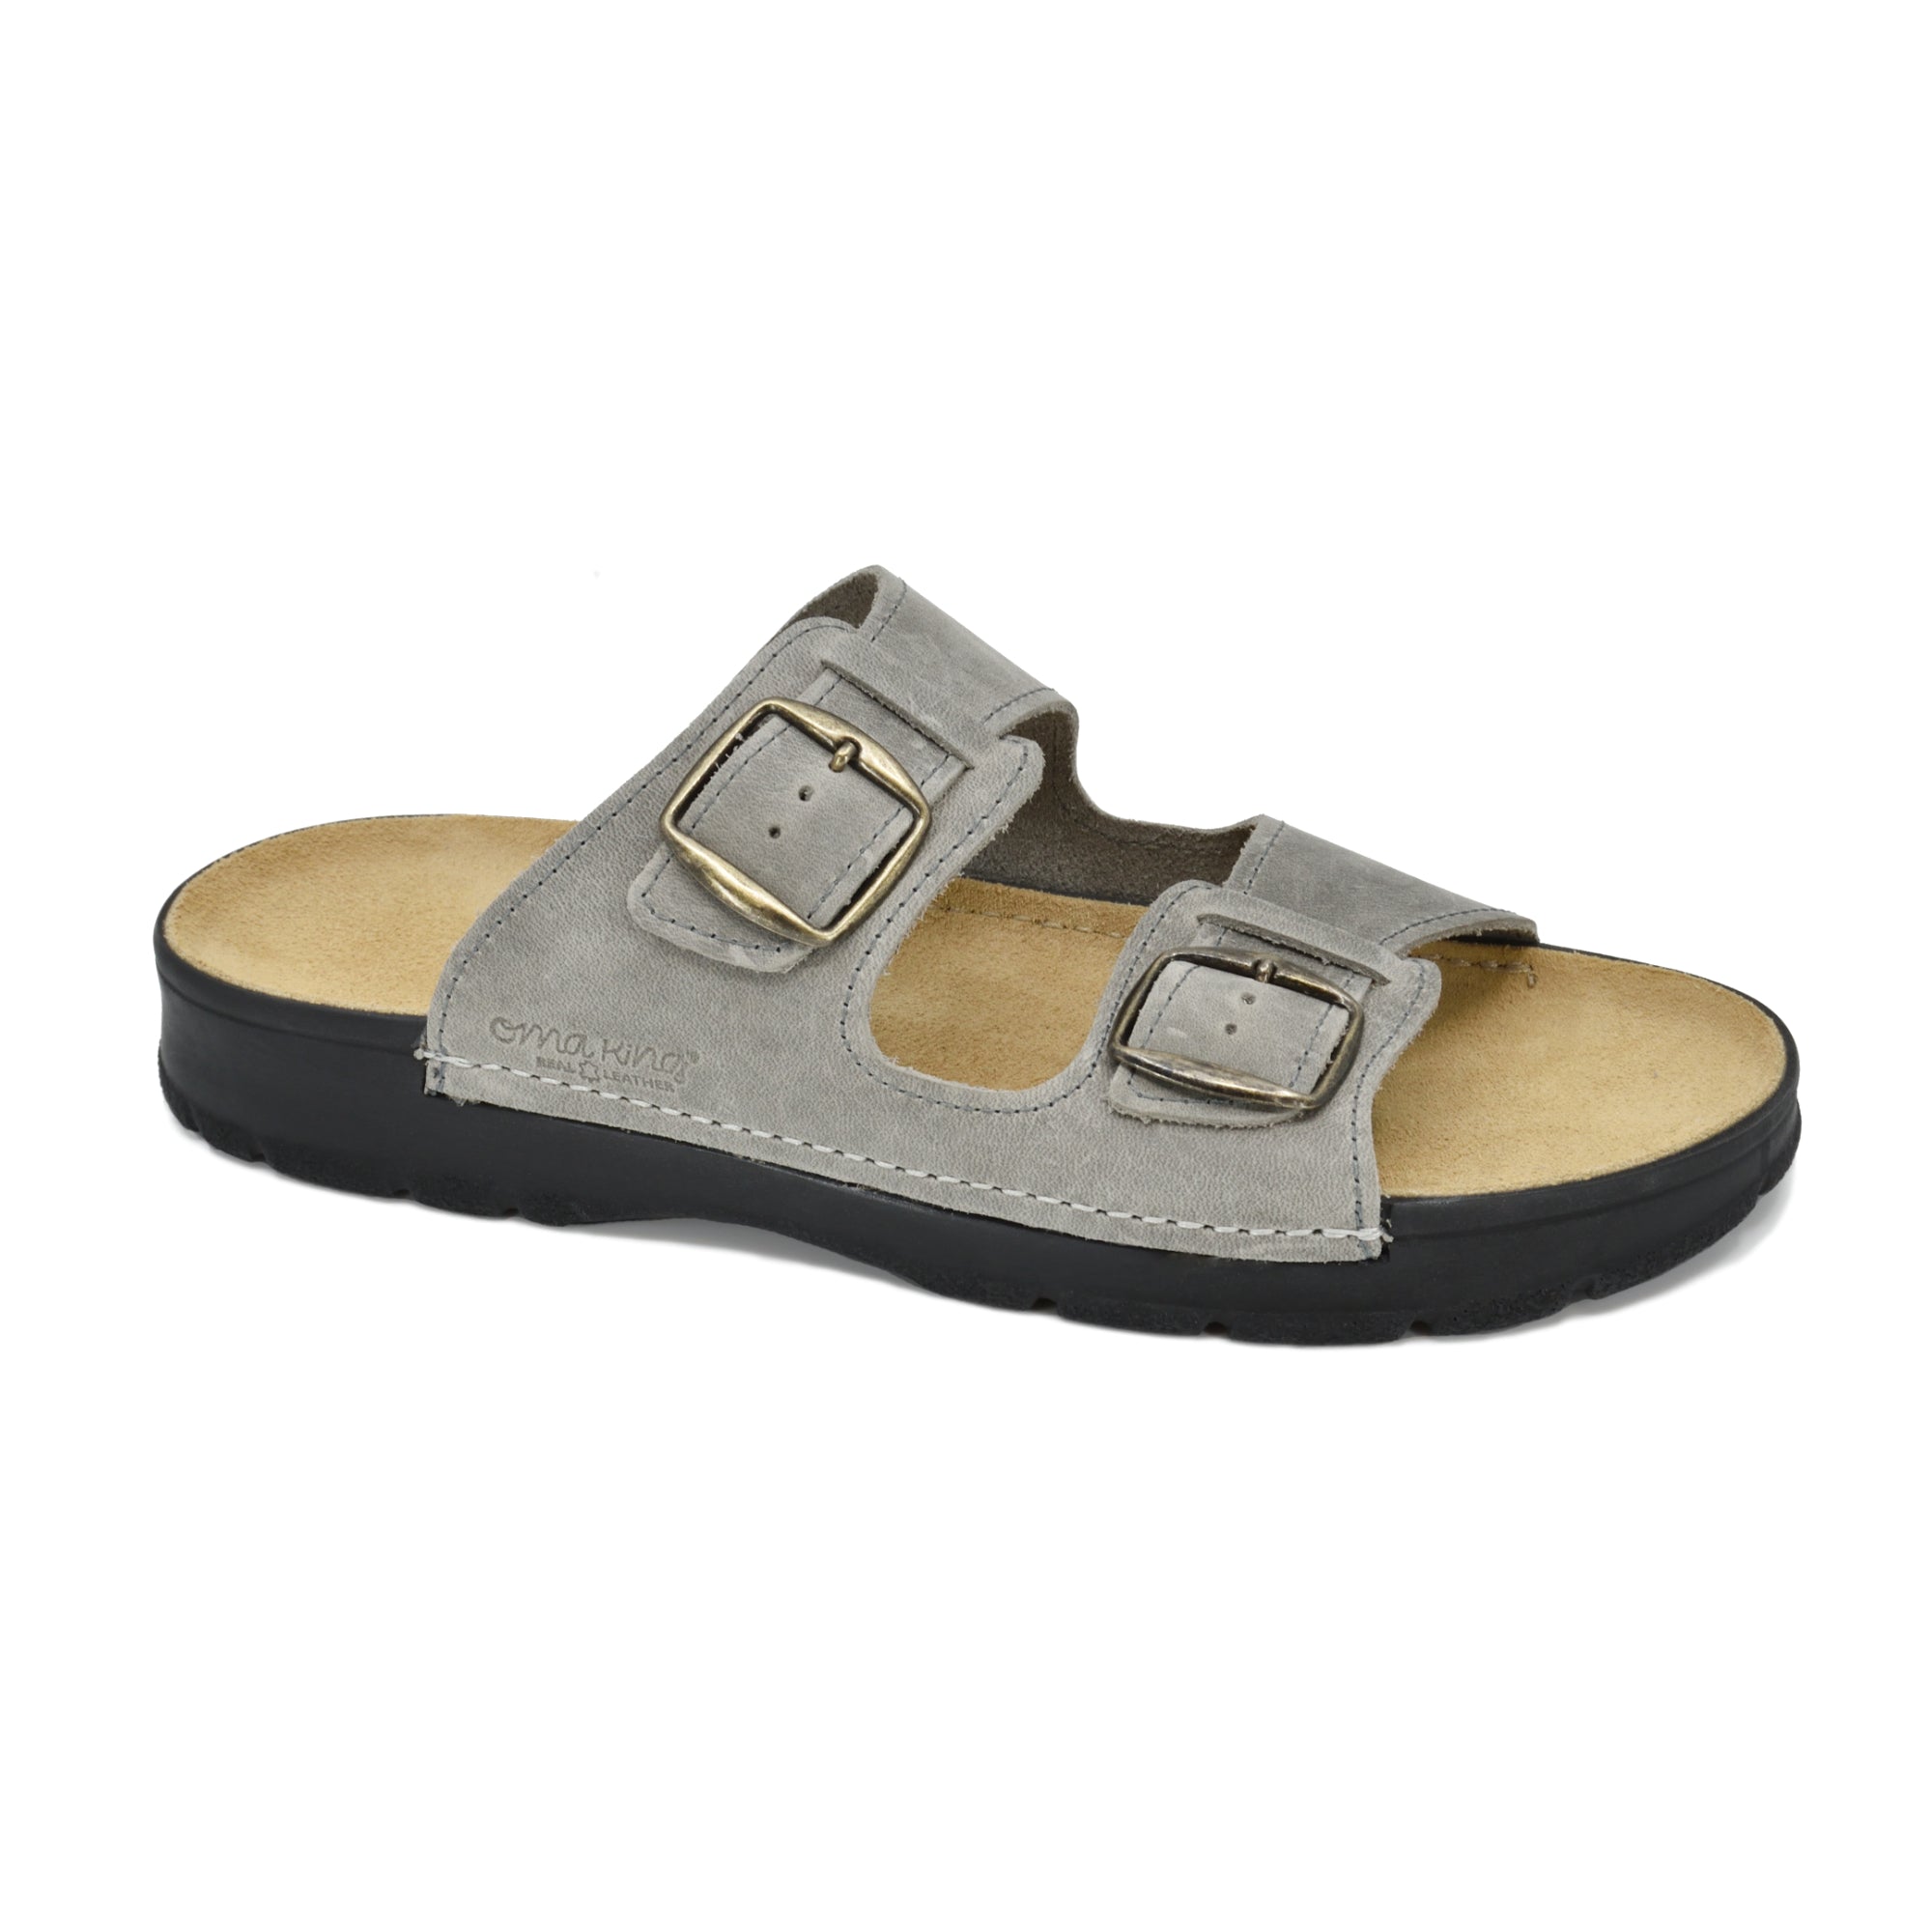 Men's leather sandals Mike, grey